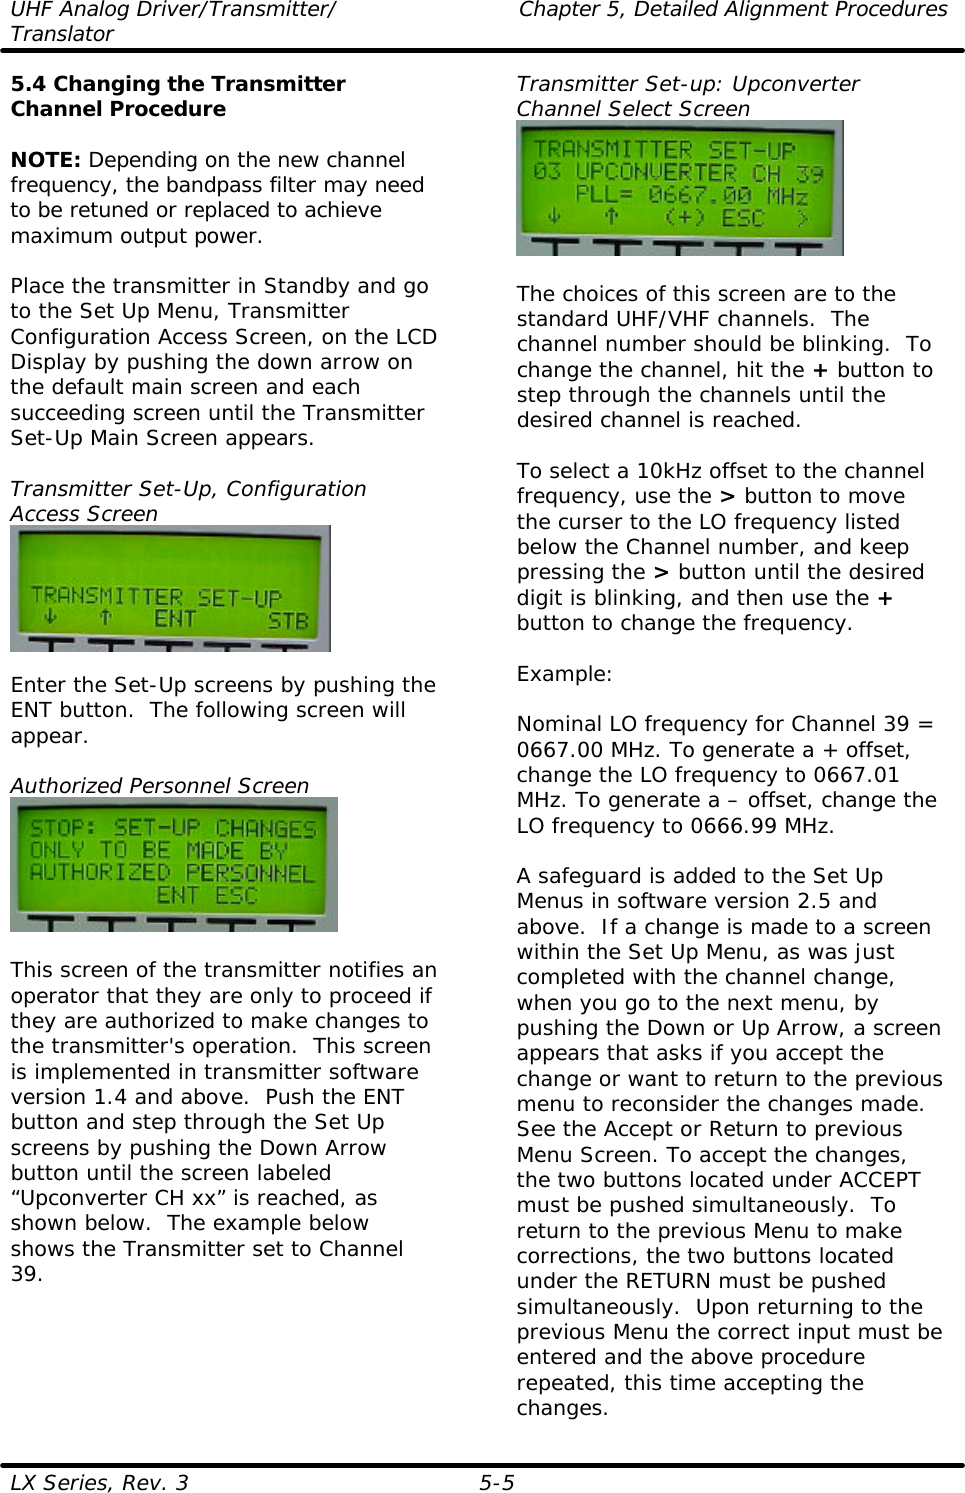 UHF Analog Driver/Transmitter/ Chapter 5, Detailed Alignment Procedures Translator  LX Series, Rev. 3 5-5 5.4 Changing the Transmitter Channel Procedure  NOTE: Depending on the new channel frequency, the bandpass filter may need to be retuned or replaced to achieve maximum output power.  Place the transmitter in Standby and go to the Set Up Menu, Transmitter Configuration Access Screen, on the LCD Display by pushing the down arrow on the default main screen and each succeeding screen until the Transmitter Set-Up Main Screen appears.  Transmitter Set-Up, Configuration Access Screen   Enter the Set-Up screens by pushing the ENT button.  The following screen will appear.  Authorized Personnel Screen   This screen of the transmitter notifies an operator that they are only to proceed if they are authorized to make changes to the transmitter&apos;s operation.  This screen is implemented in transmitter software version 1.4 and above.  Push the ENT button and step through the Set Up screens by pushing the Down Arrow button until the screen labeled “Upconverter CH xx” is reached, as shown below.  The example below shows the Transmitter set to Channel 39. Transmitter Set-up: Upconverter Channel Select Screen   The choices of this screen are to the standard UHF/VHF channels.  The channel number should be blinking.  To change the channel, hit the + button to step through the channels until the desired channel is reached.   To select a 10kHz offset to the channel frequency, use the &gt; button to move the curser to the LO frequency listed below the Channel number, and keep pressing the &gt; button until the desired digit is blinking, and then use the + button to change the frequency.   Example:  Nominal LO frequency for Channel 39 = 0667.00 MHz. To generate a + offset, change the LO frequency to 0667.01 MHz. To generate a – offset, change the LO frequency to 0666.99 MHz.  A safeguard is added to the Set Up Menus in software version 2.5 and above.  If a change is made to a screen within the Set Up Menu, as was just completed with the channel change, when you go to the next menu, by pushing the Down or Up Arrow, a screen appears that asks if you accept the change or want to return to the previous menu to reconsider the changes made.  See the Accept or Return to previous Menu Screen. To accept the changes, the two buttons located under ACCEPT must be pushed simultaneously.  To return to the previous Menu to make corrections, the two buttons located under the RETURN must be pushed simultaneously.  Upon returning to the previous Menu the correct input must be entered and the above procedure repeated, this time accepting the changes. 